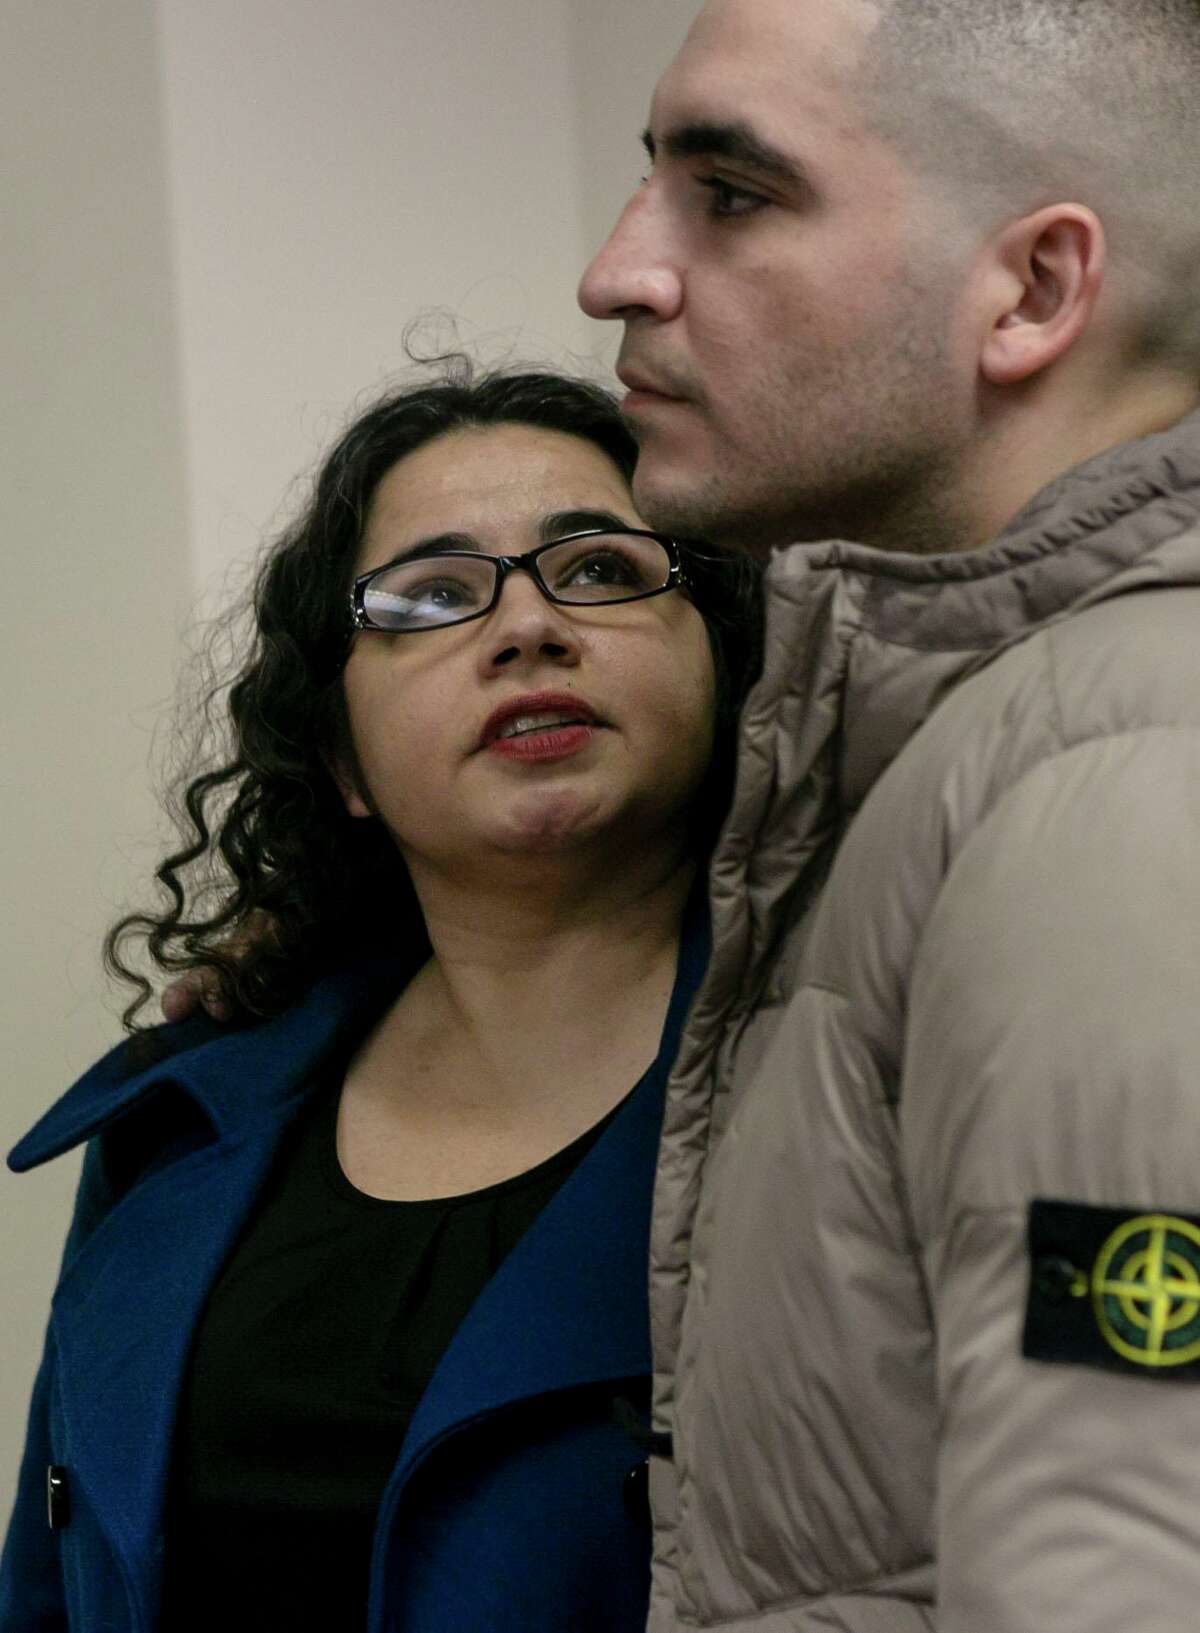 Emma Bribiescas Mancha-Sumners looks at her brother, Hector Bribiescas, as they spoke to reporters at their attorney’s office last year. The father has filed a lawsuit regarding the shooting death of his daughter, 10-year-old London Bribiescas. Mancha-Sumners is the child’s aunt.